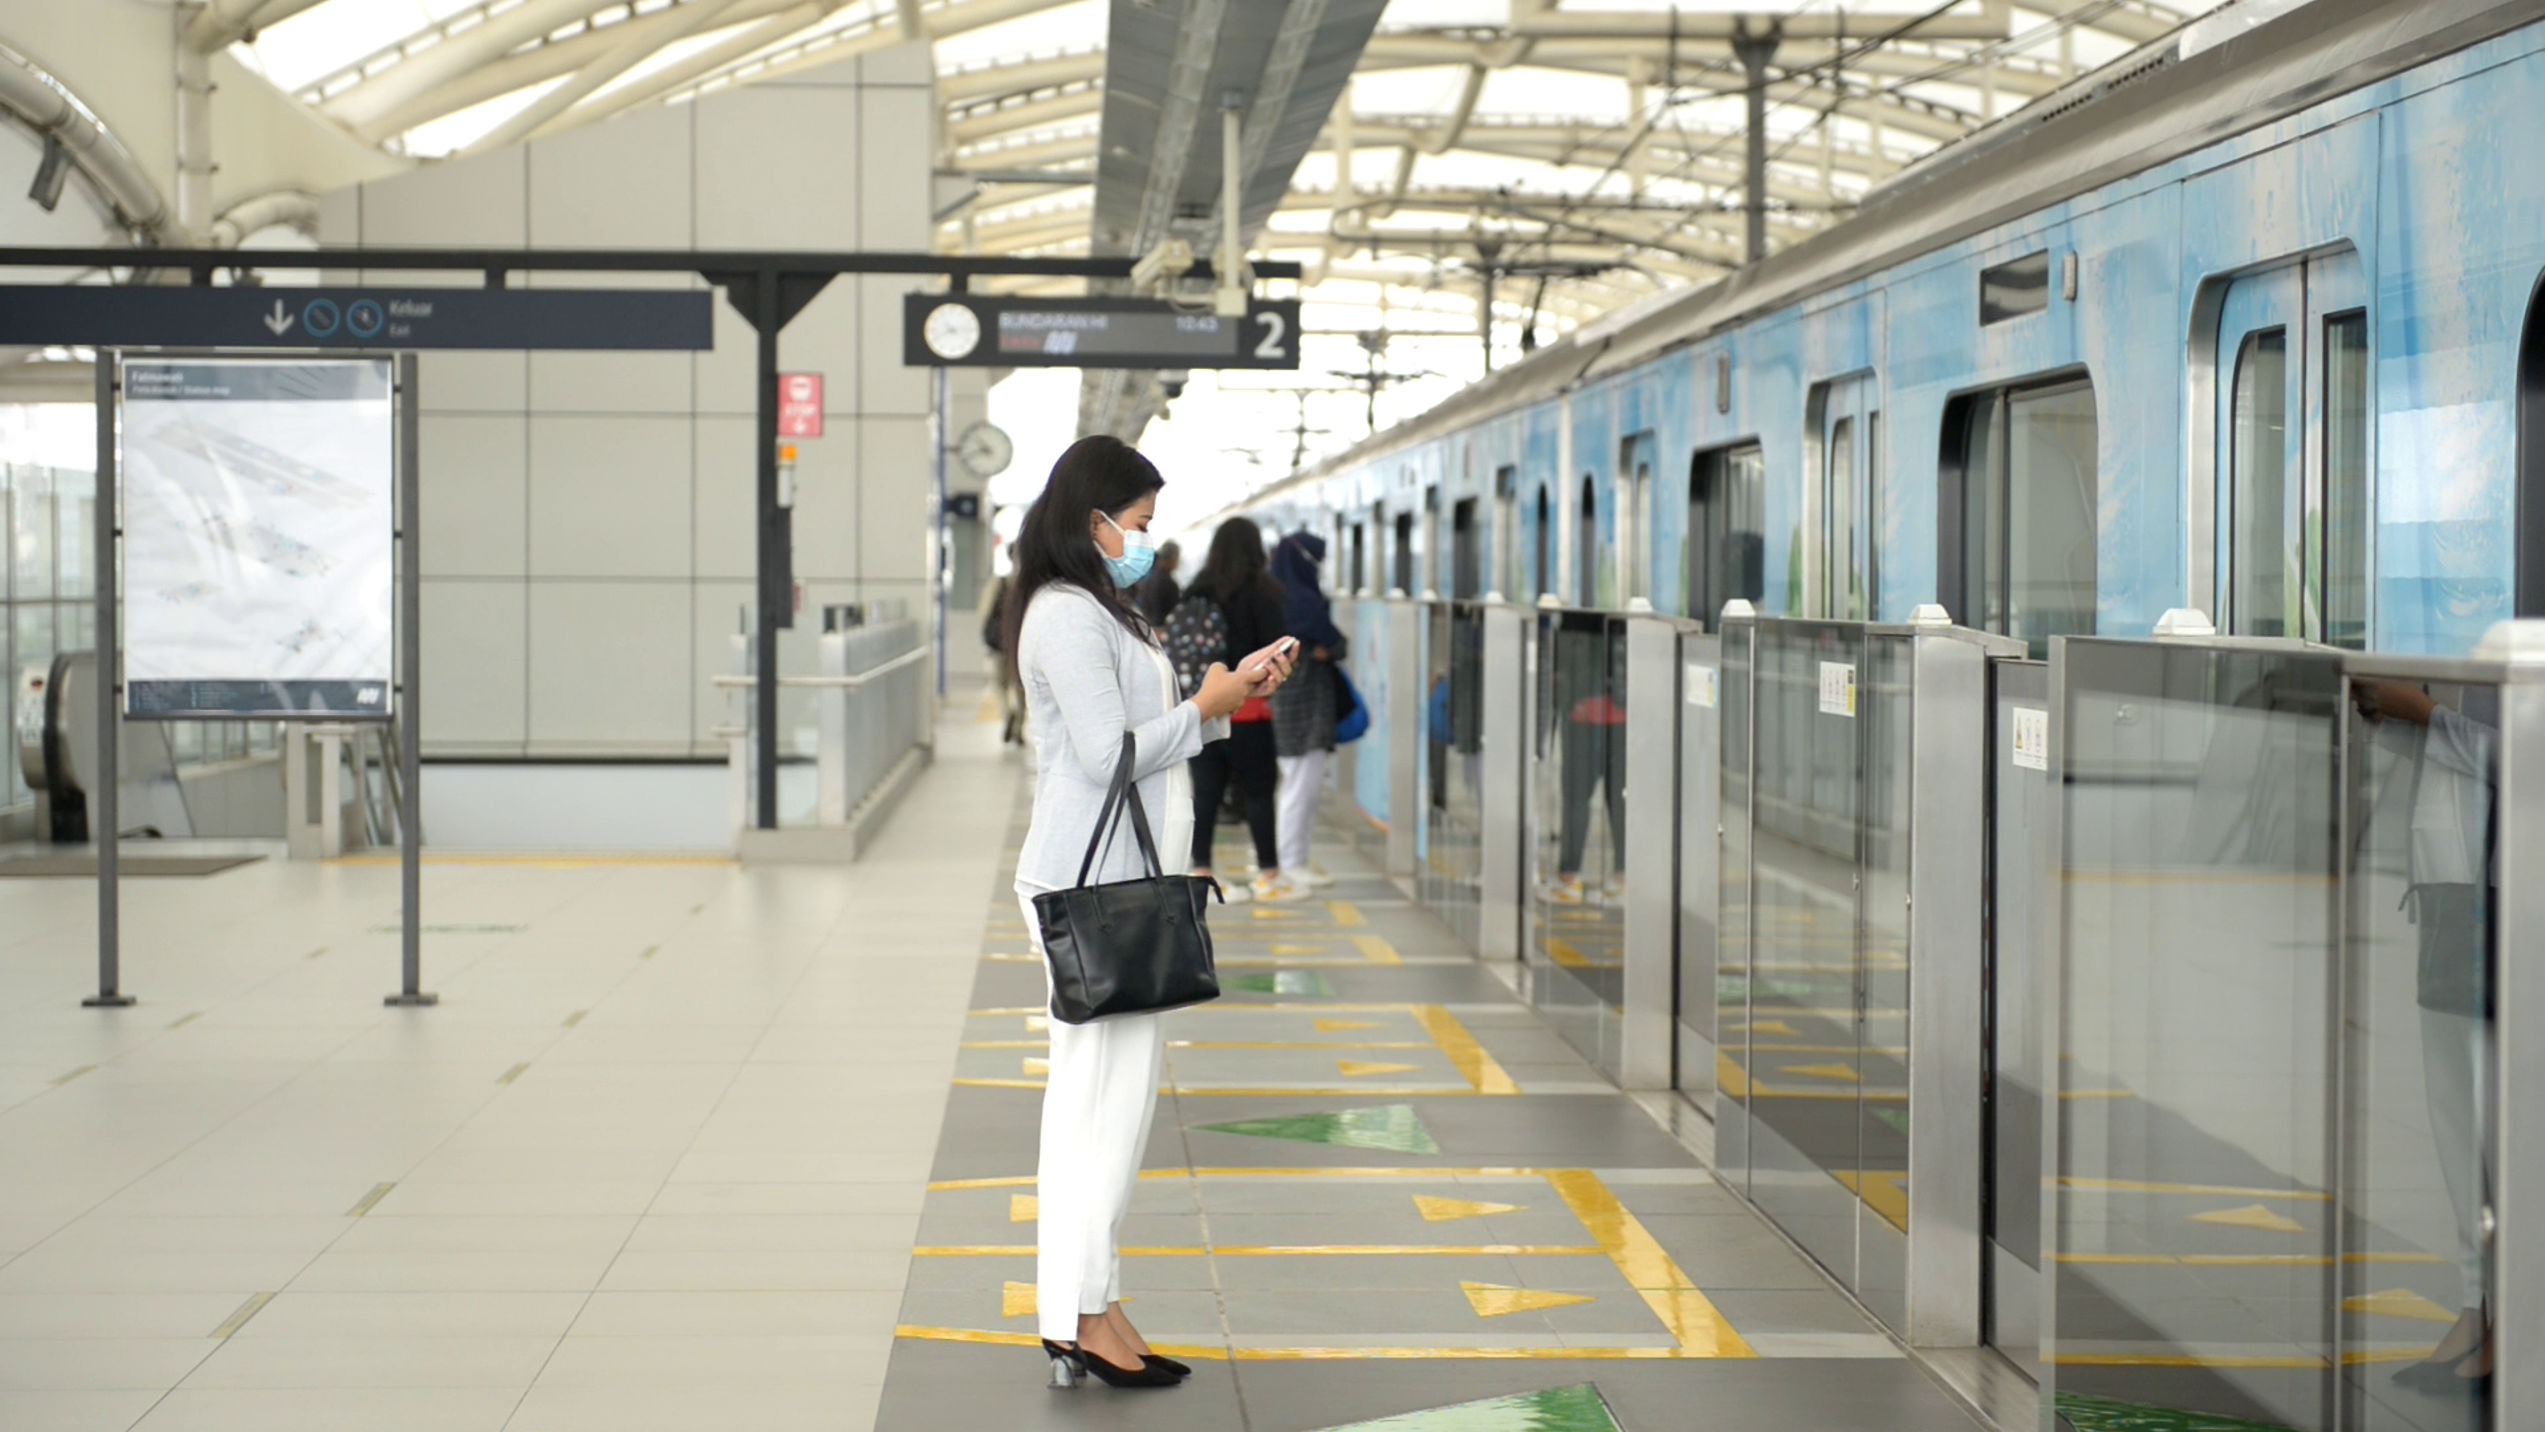 MRT Jakarta has been operating for five years. Are you just going to try it out now? Here's how to buy tickets and the fares.